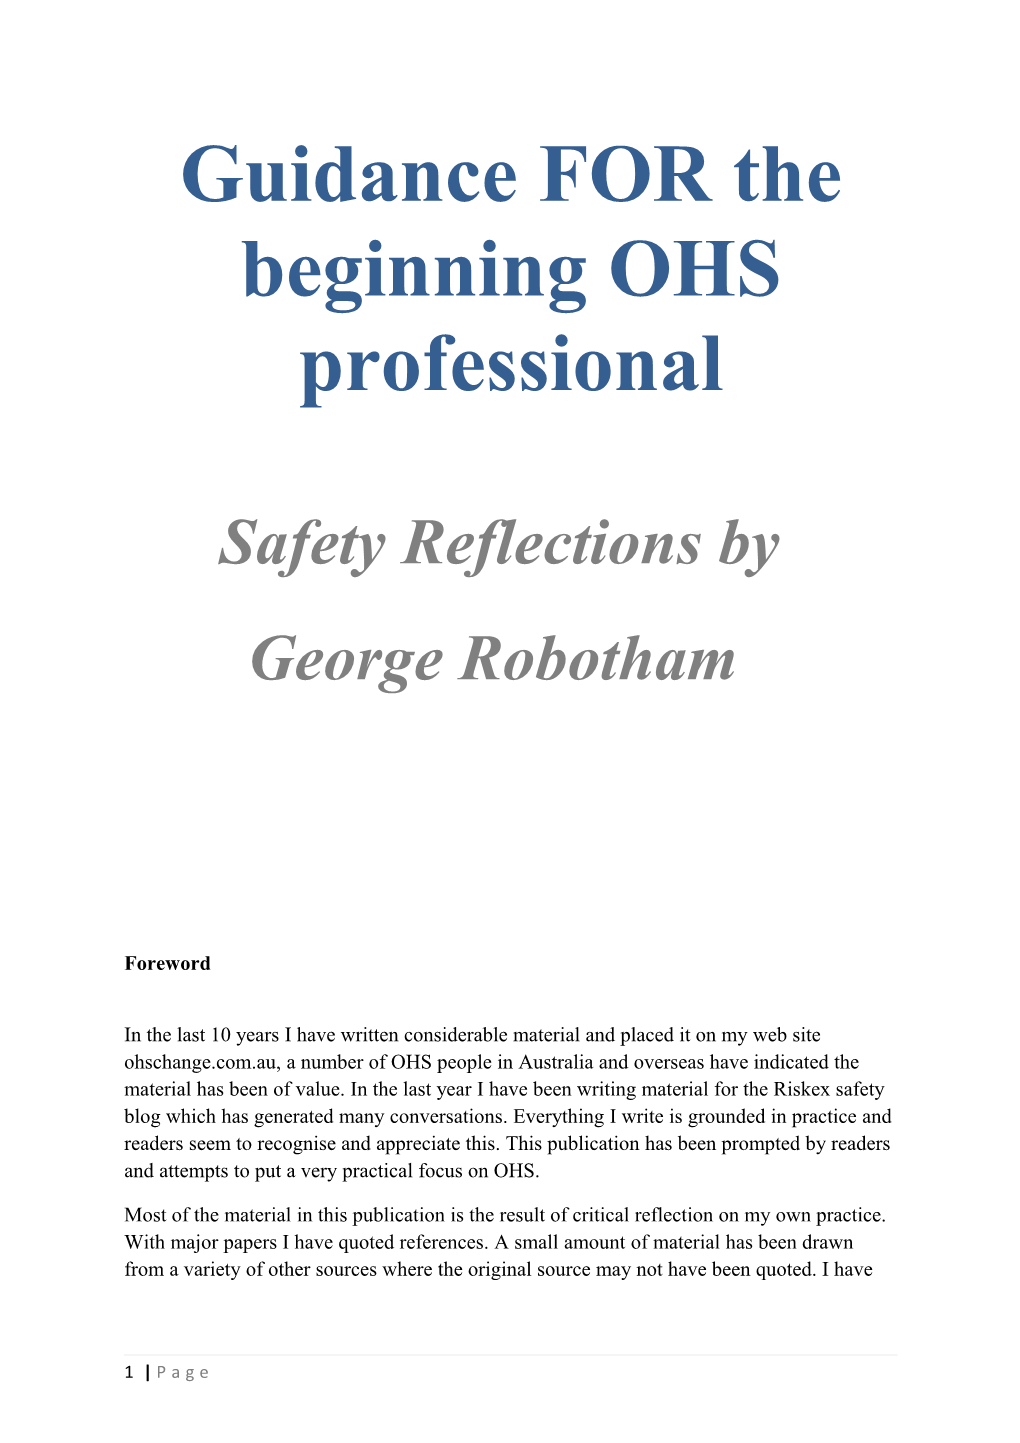 Guidance for the Beginning OHS Professional